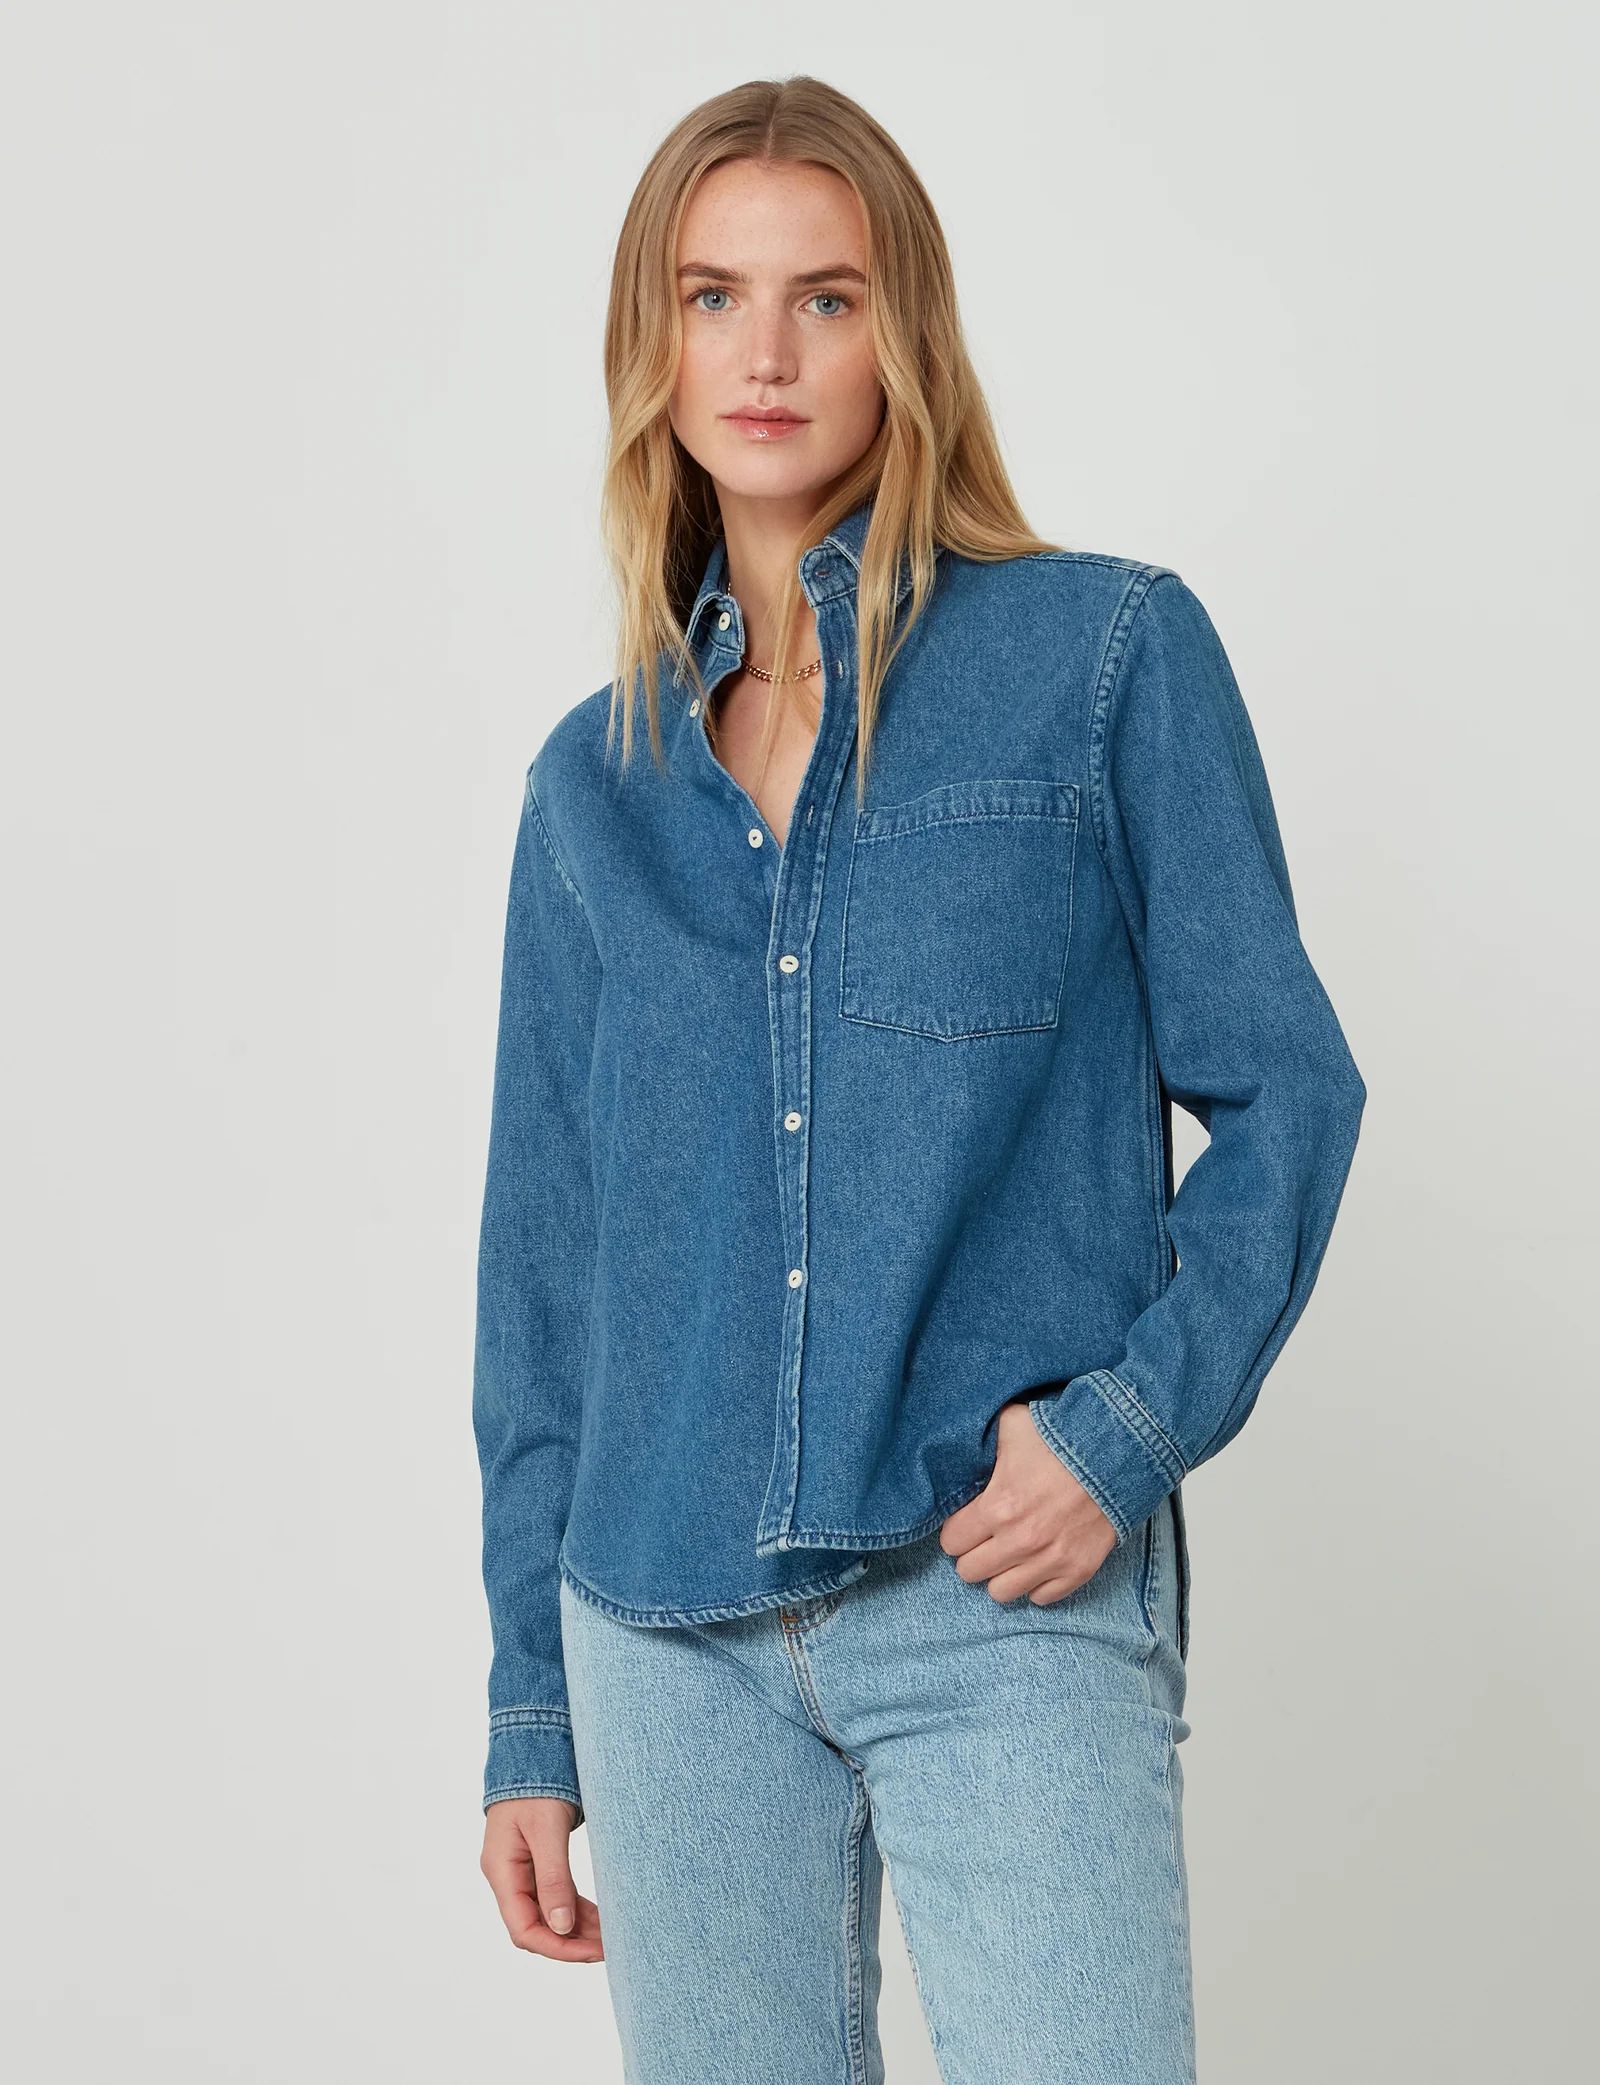 The Classic: Denim | With Nothing Underneath